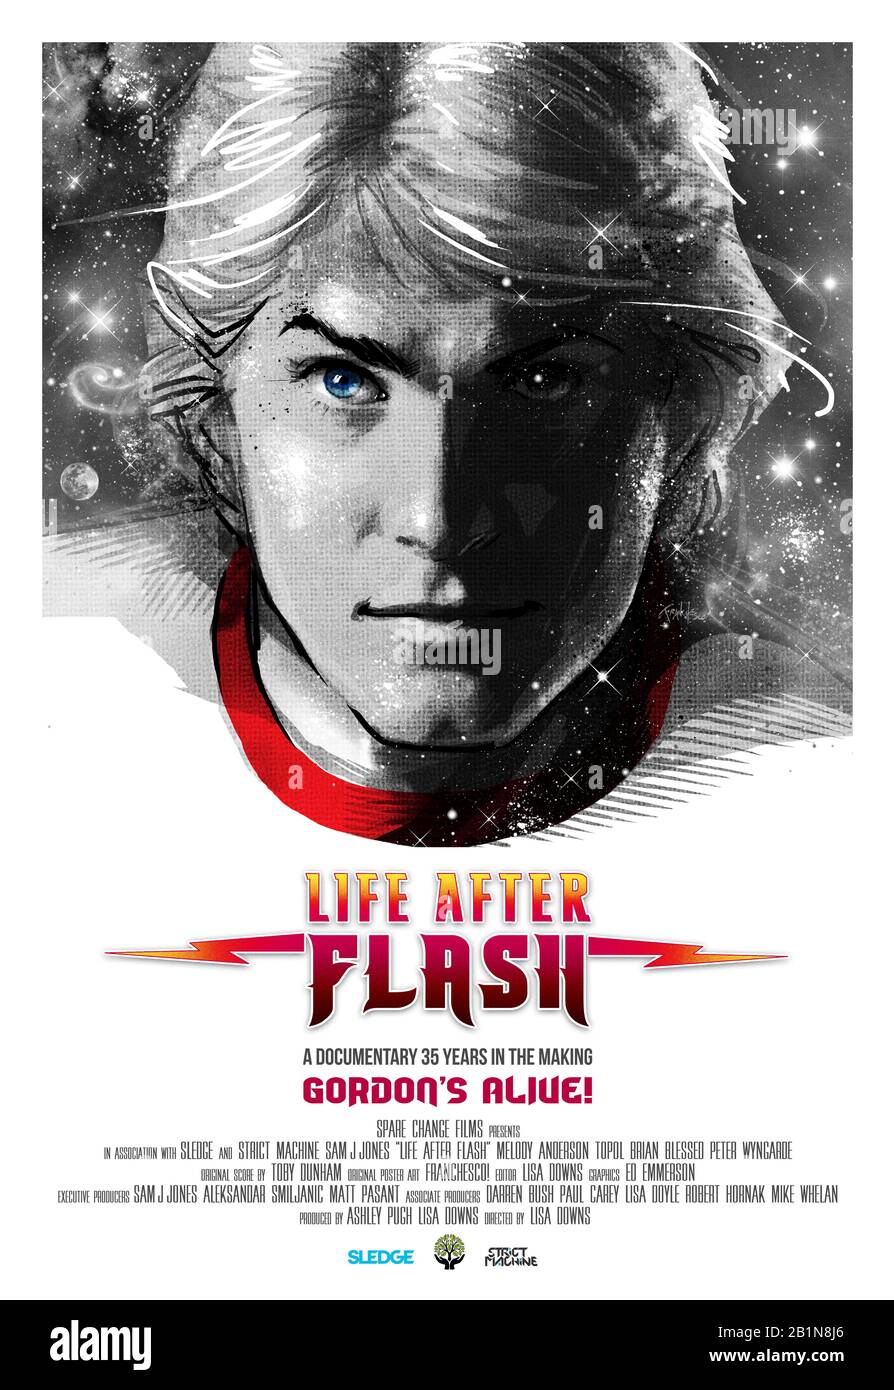 Life After Flash (2017) directed by Lisa Downs and starring Sam J. Jones, Melody Anderson, Brian Blessed and Peter Duncan. Documentary following the ups and downs of Sam J. Jones since he starred as the title character in Mike Hodges' 1980 film Flash Gordon. Stock Photo